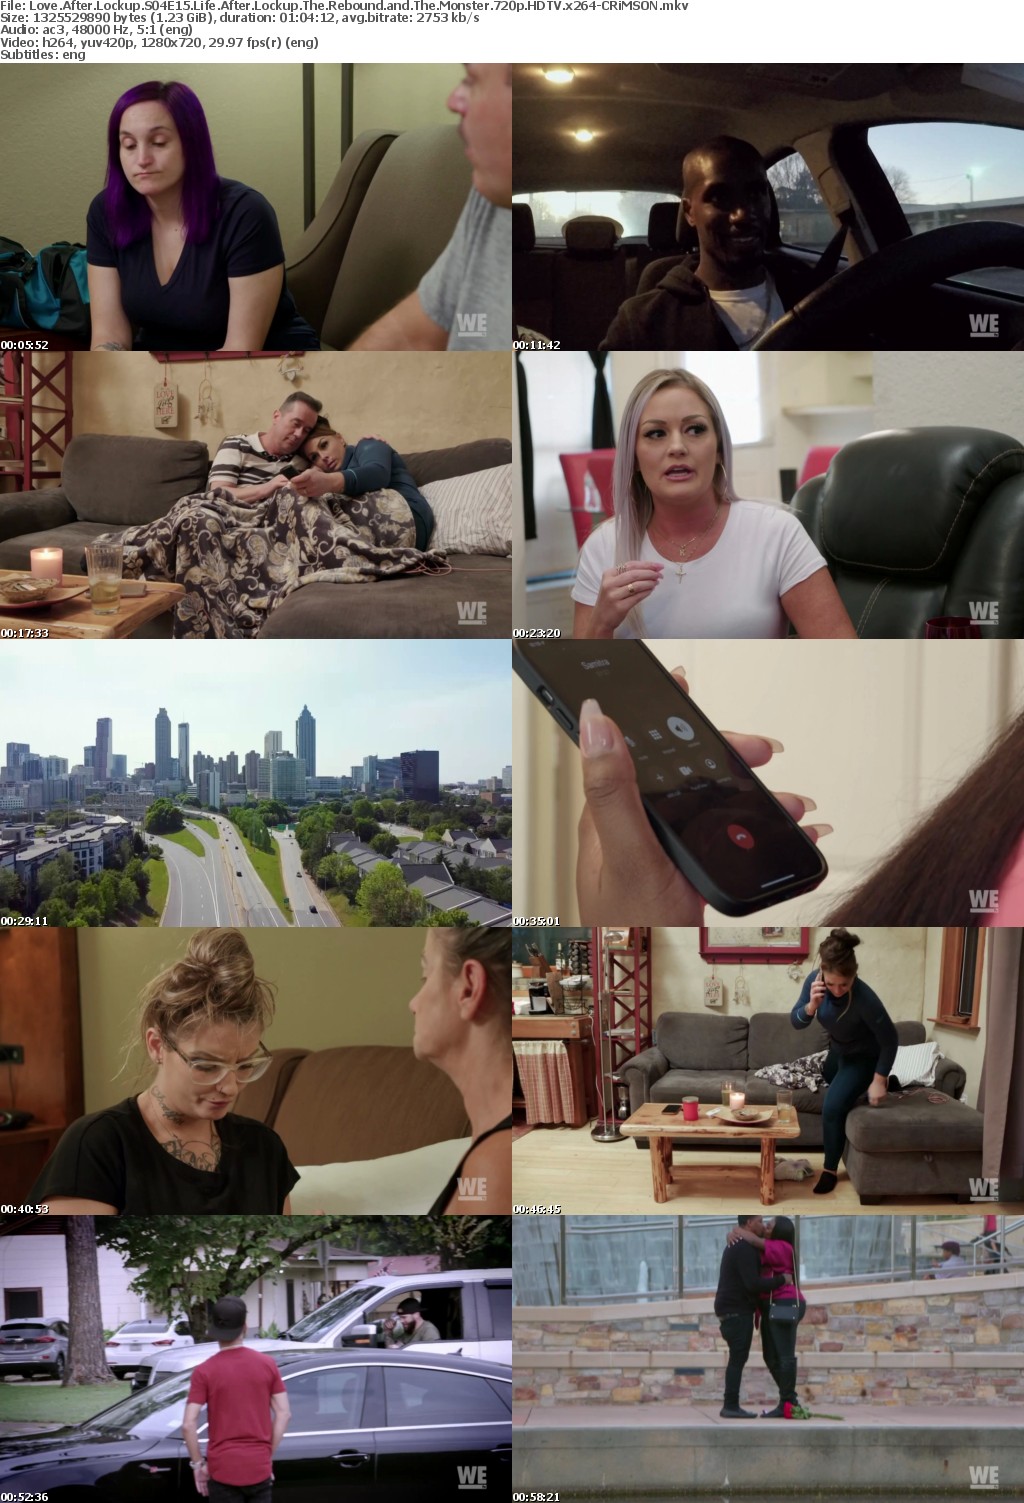 Love After Lockup S04E15 Life After Lockup The Rebound and The Monster 720p HDTV x264-CRiMSON